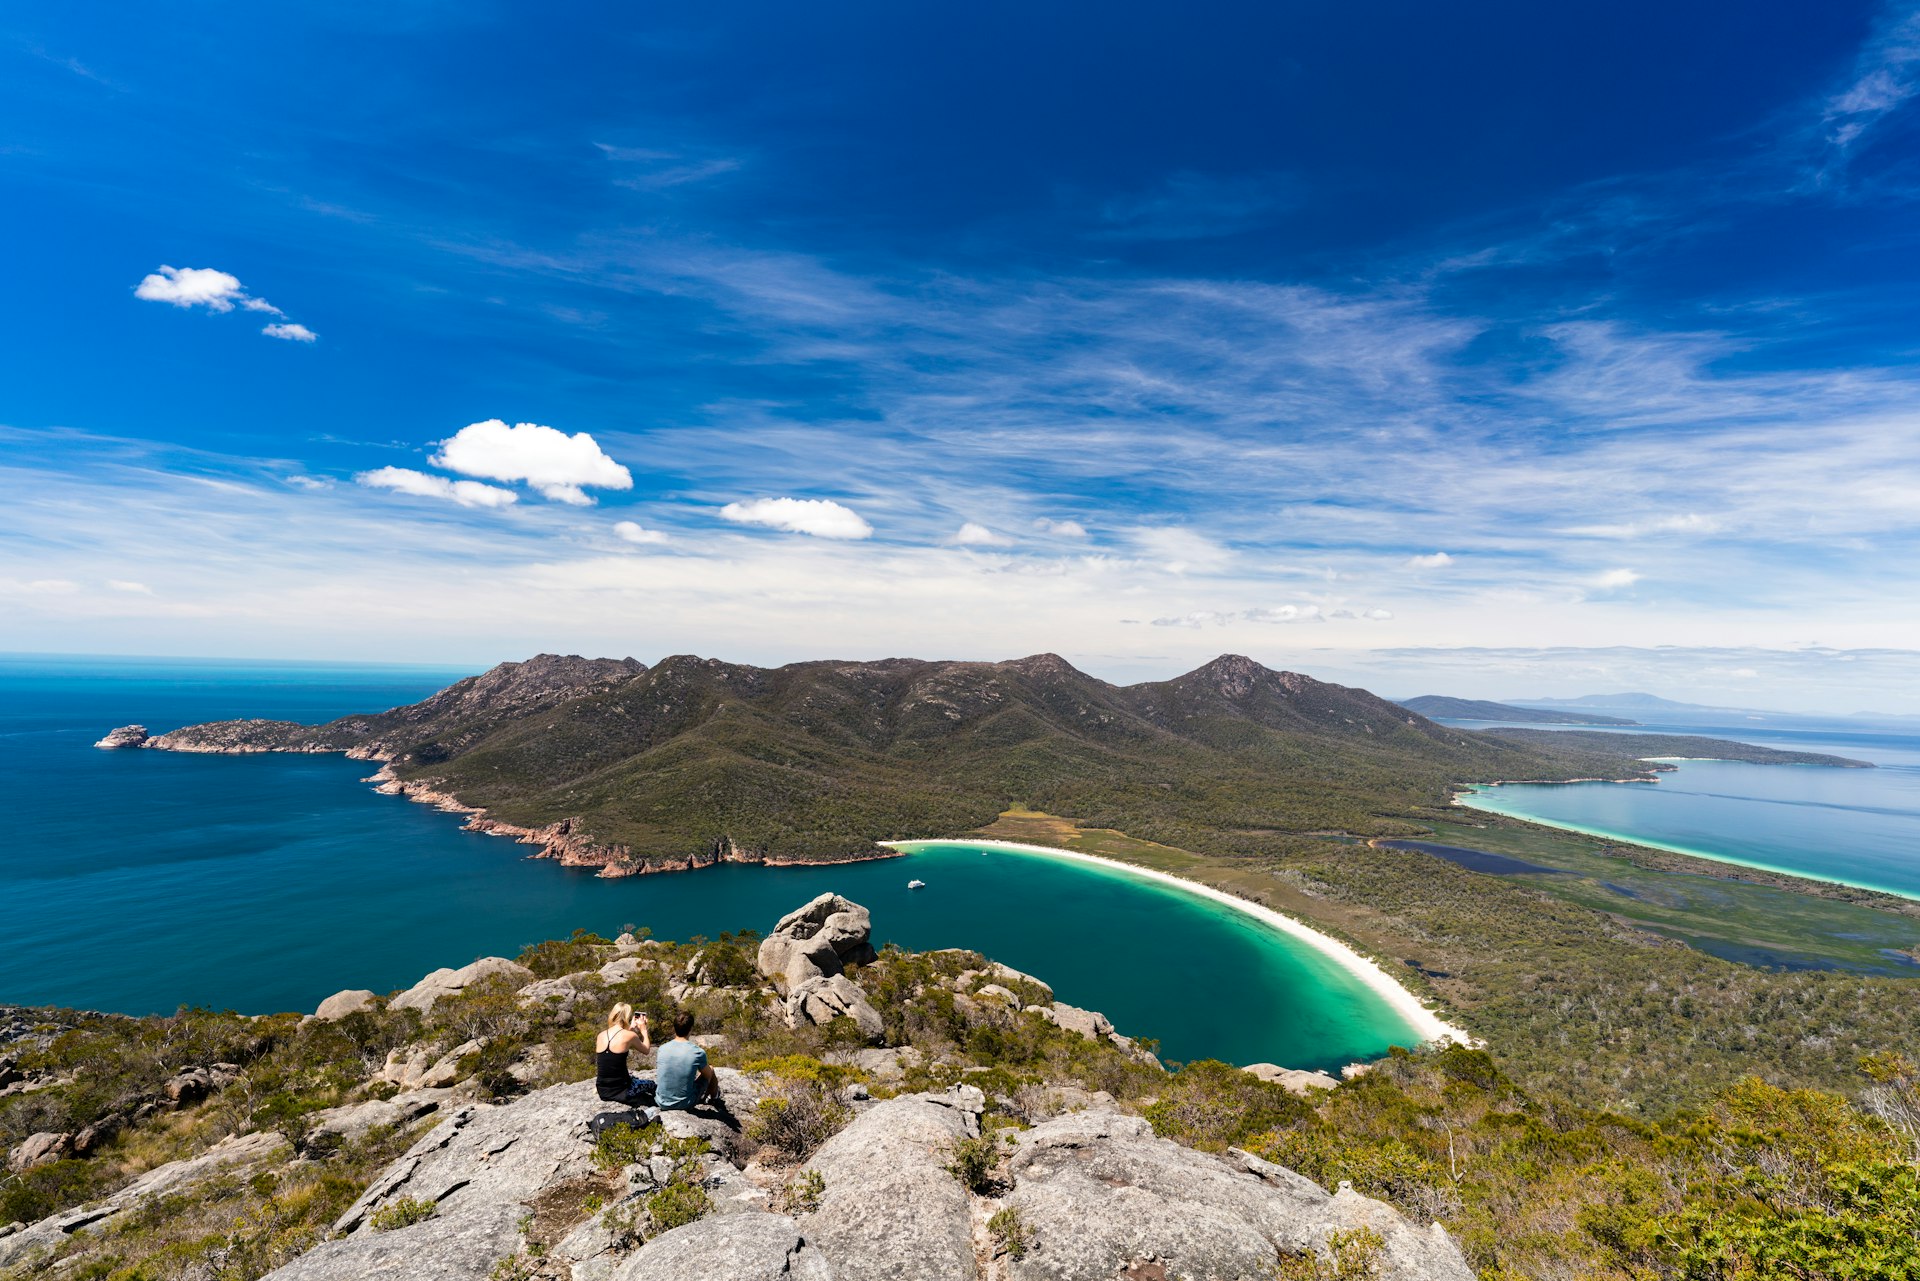 An aerial view of two people on top of Mt Amos overlooking Wineglass Bay in Tasmania